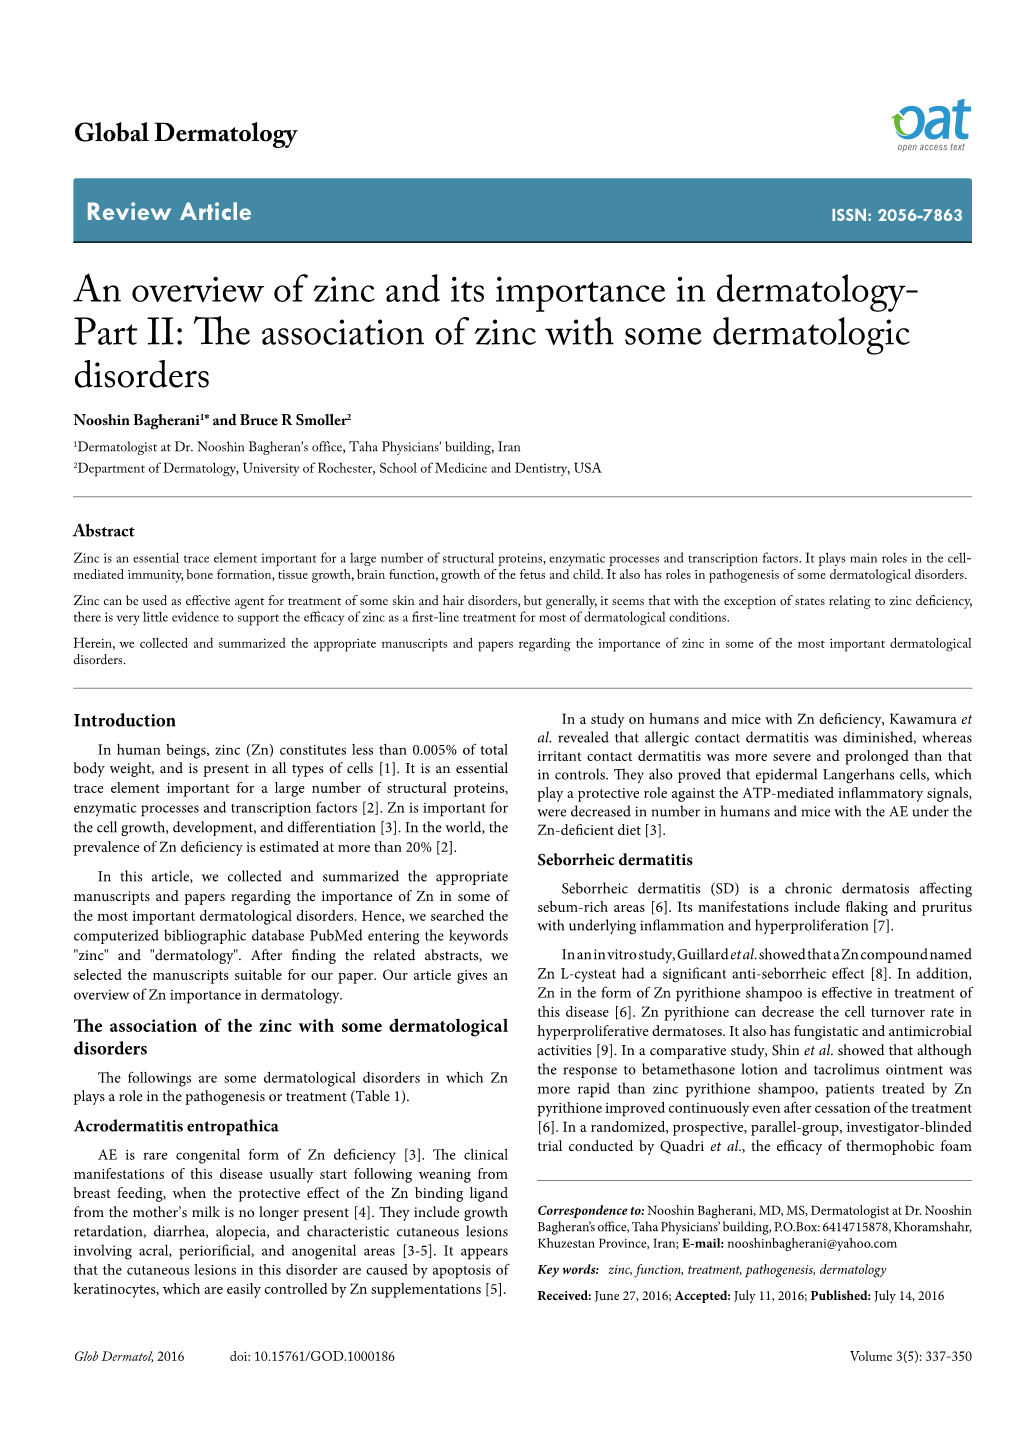 An Overview of Zinc and Its Importance in Dermatology- Part II